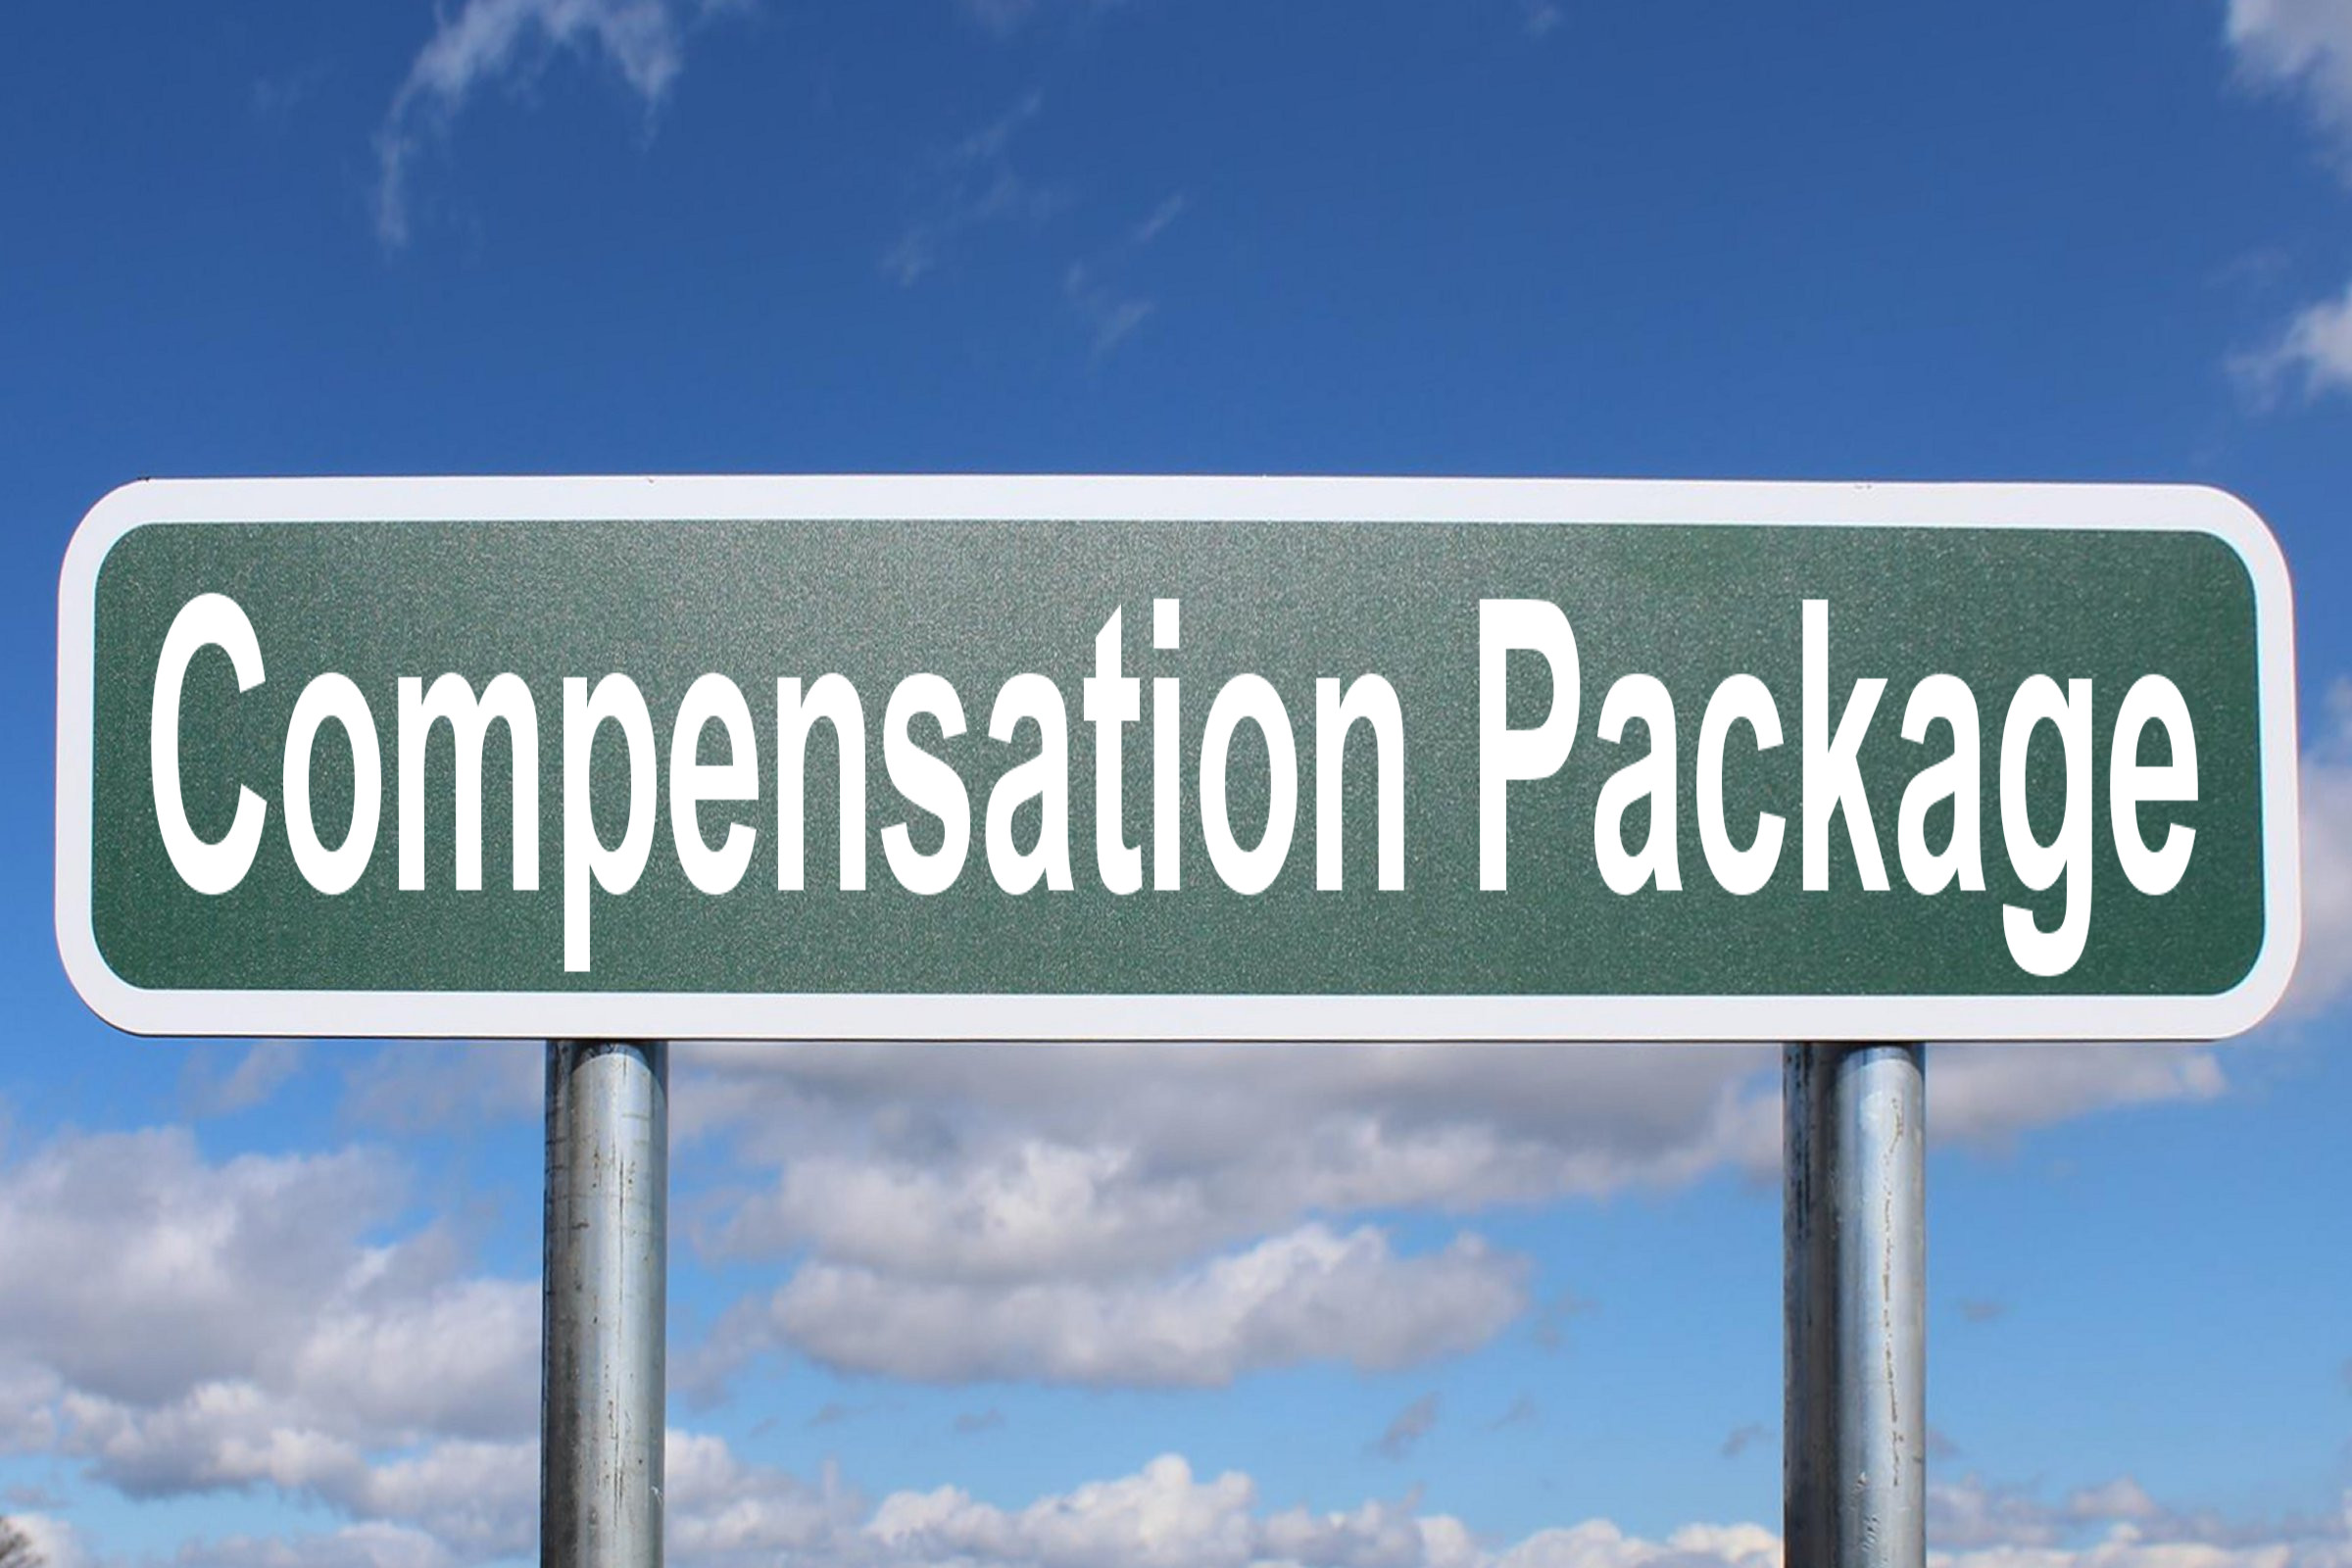 compensation package